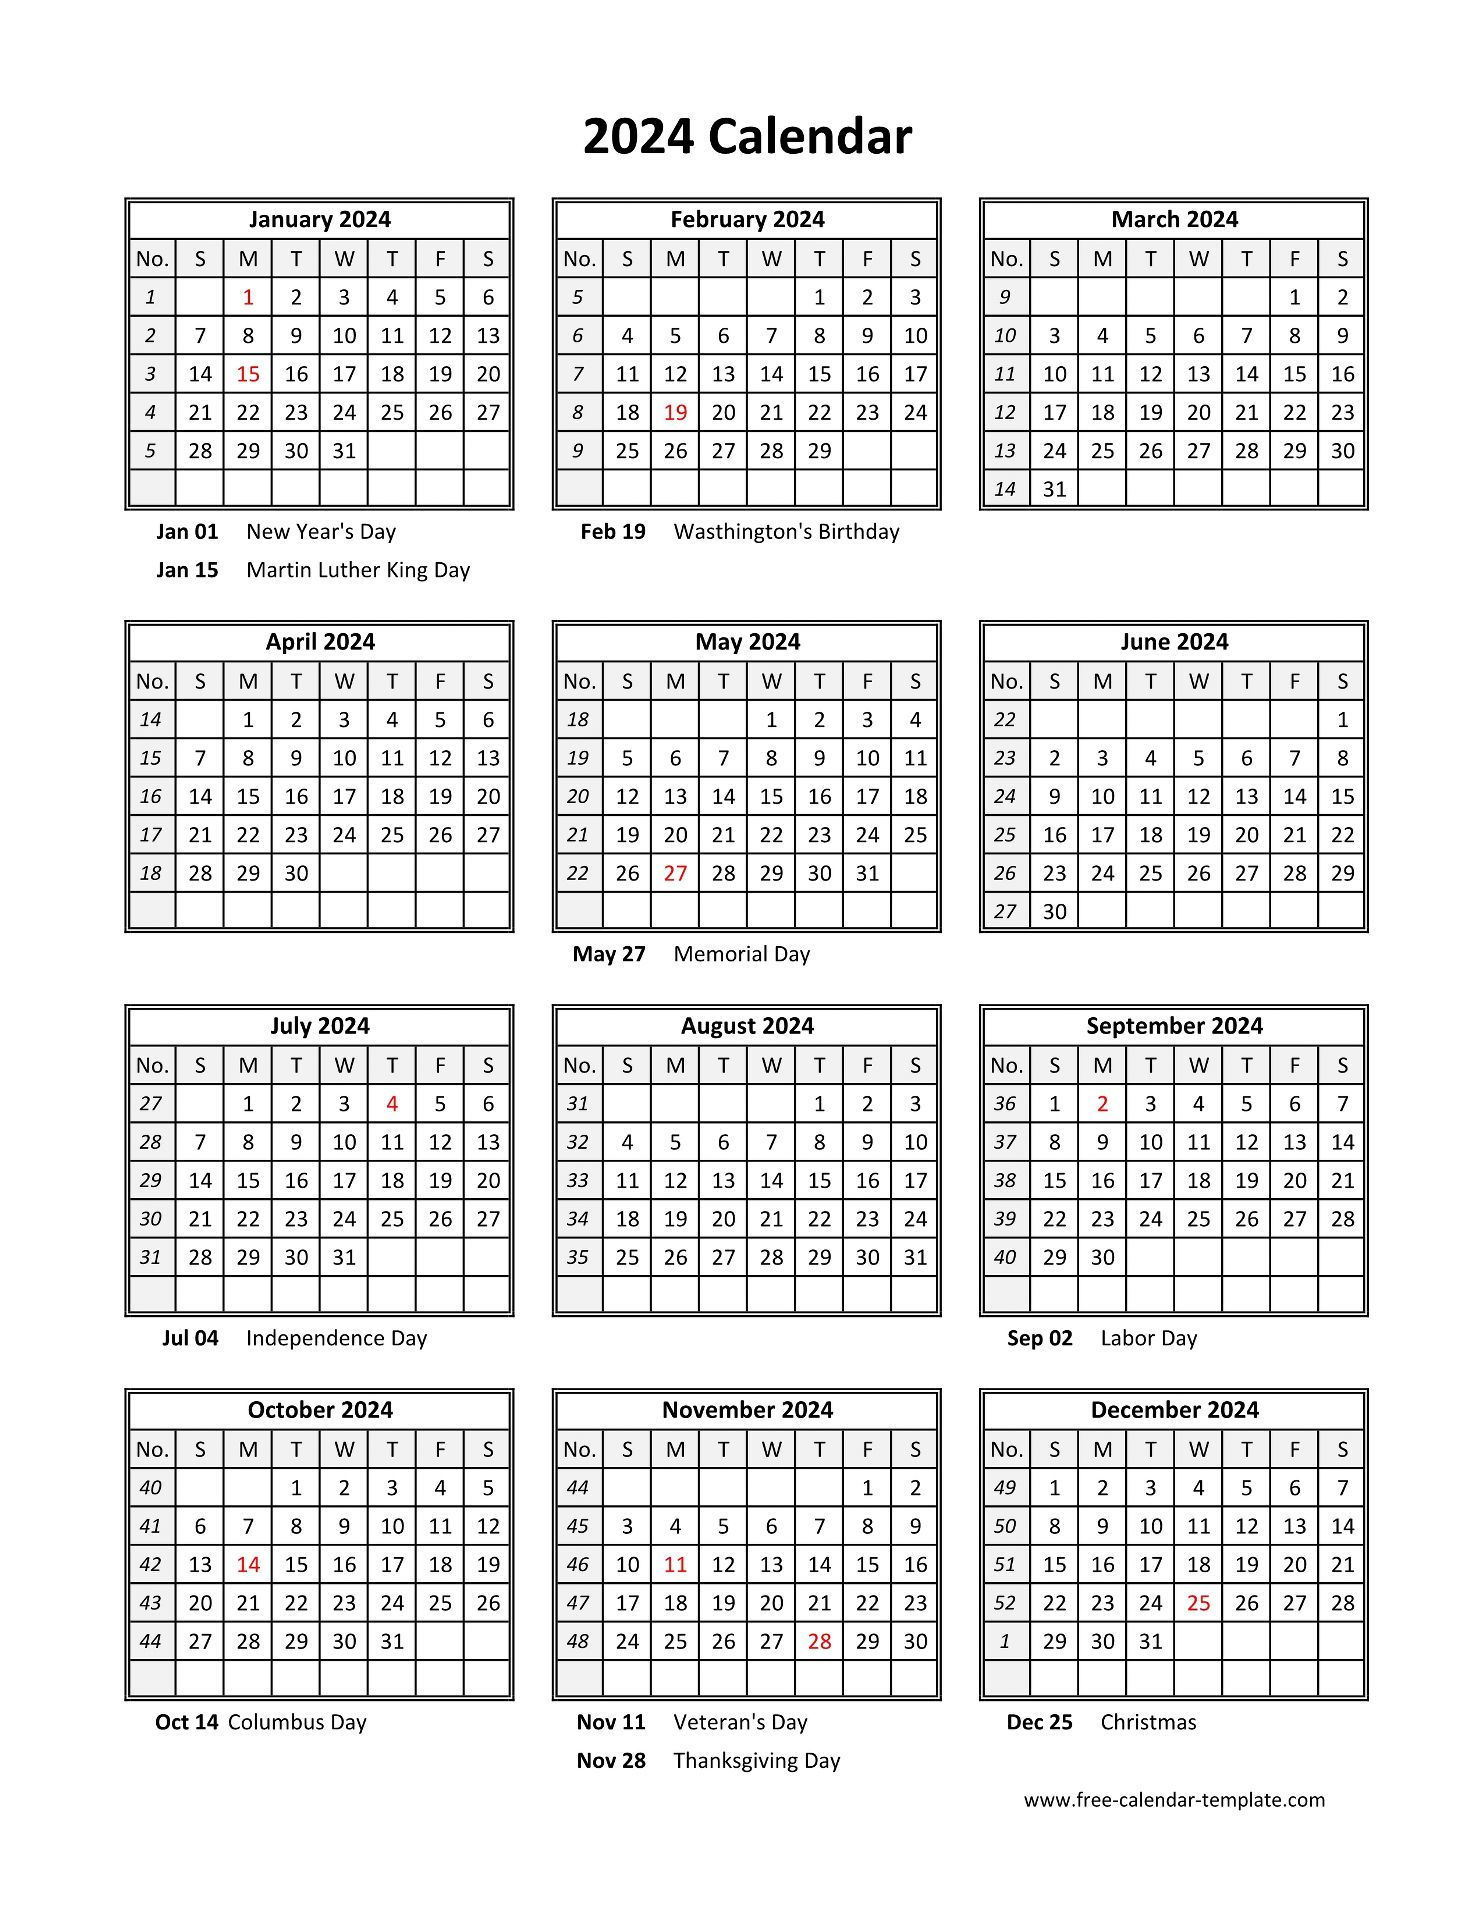 Yearly Printable Calendar 2024 With Holidays | Free-Calendar | Printable Calendar 2024 Annual